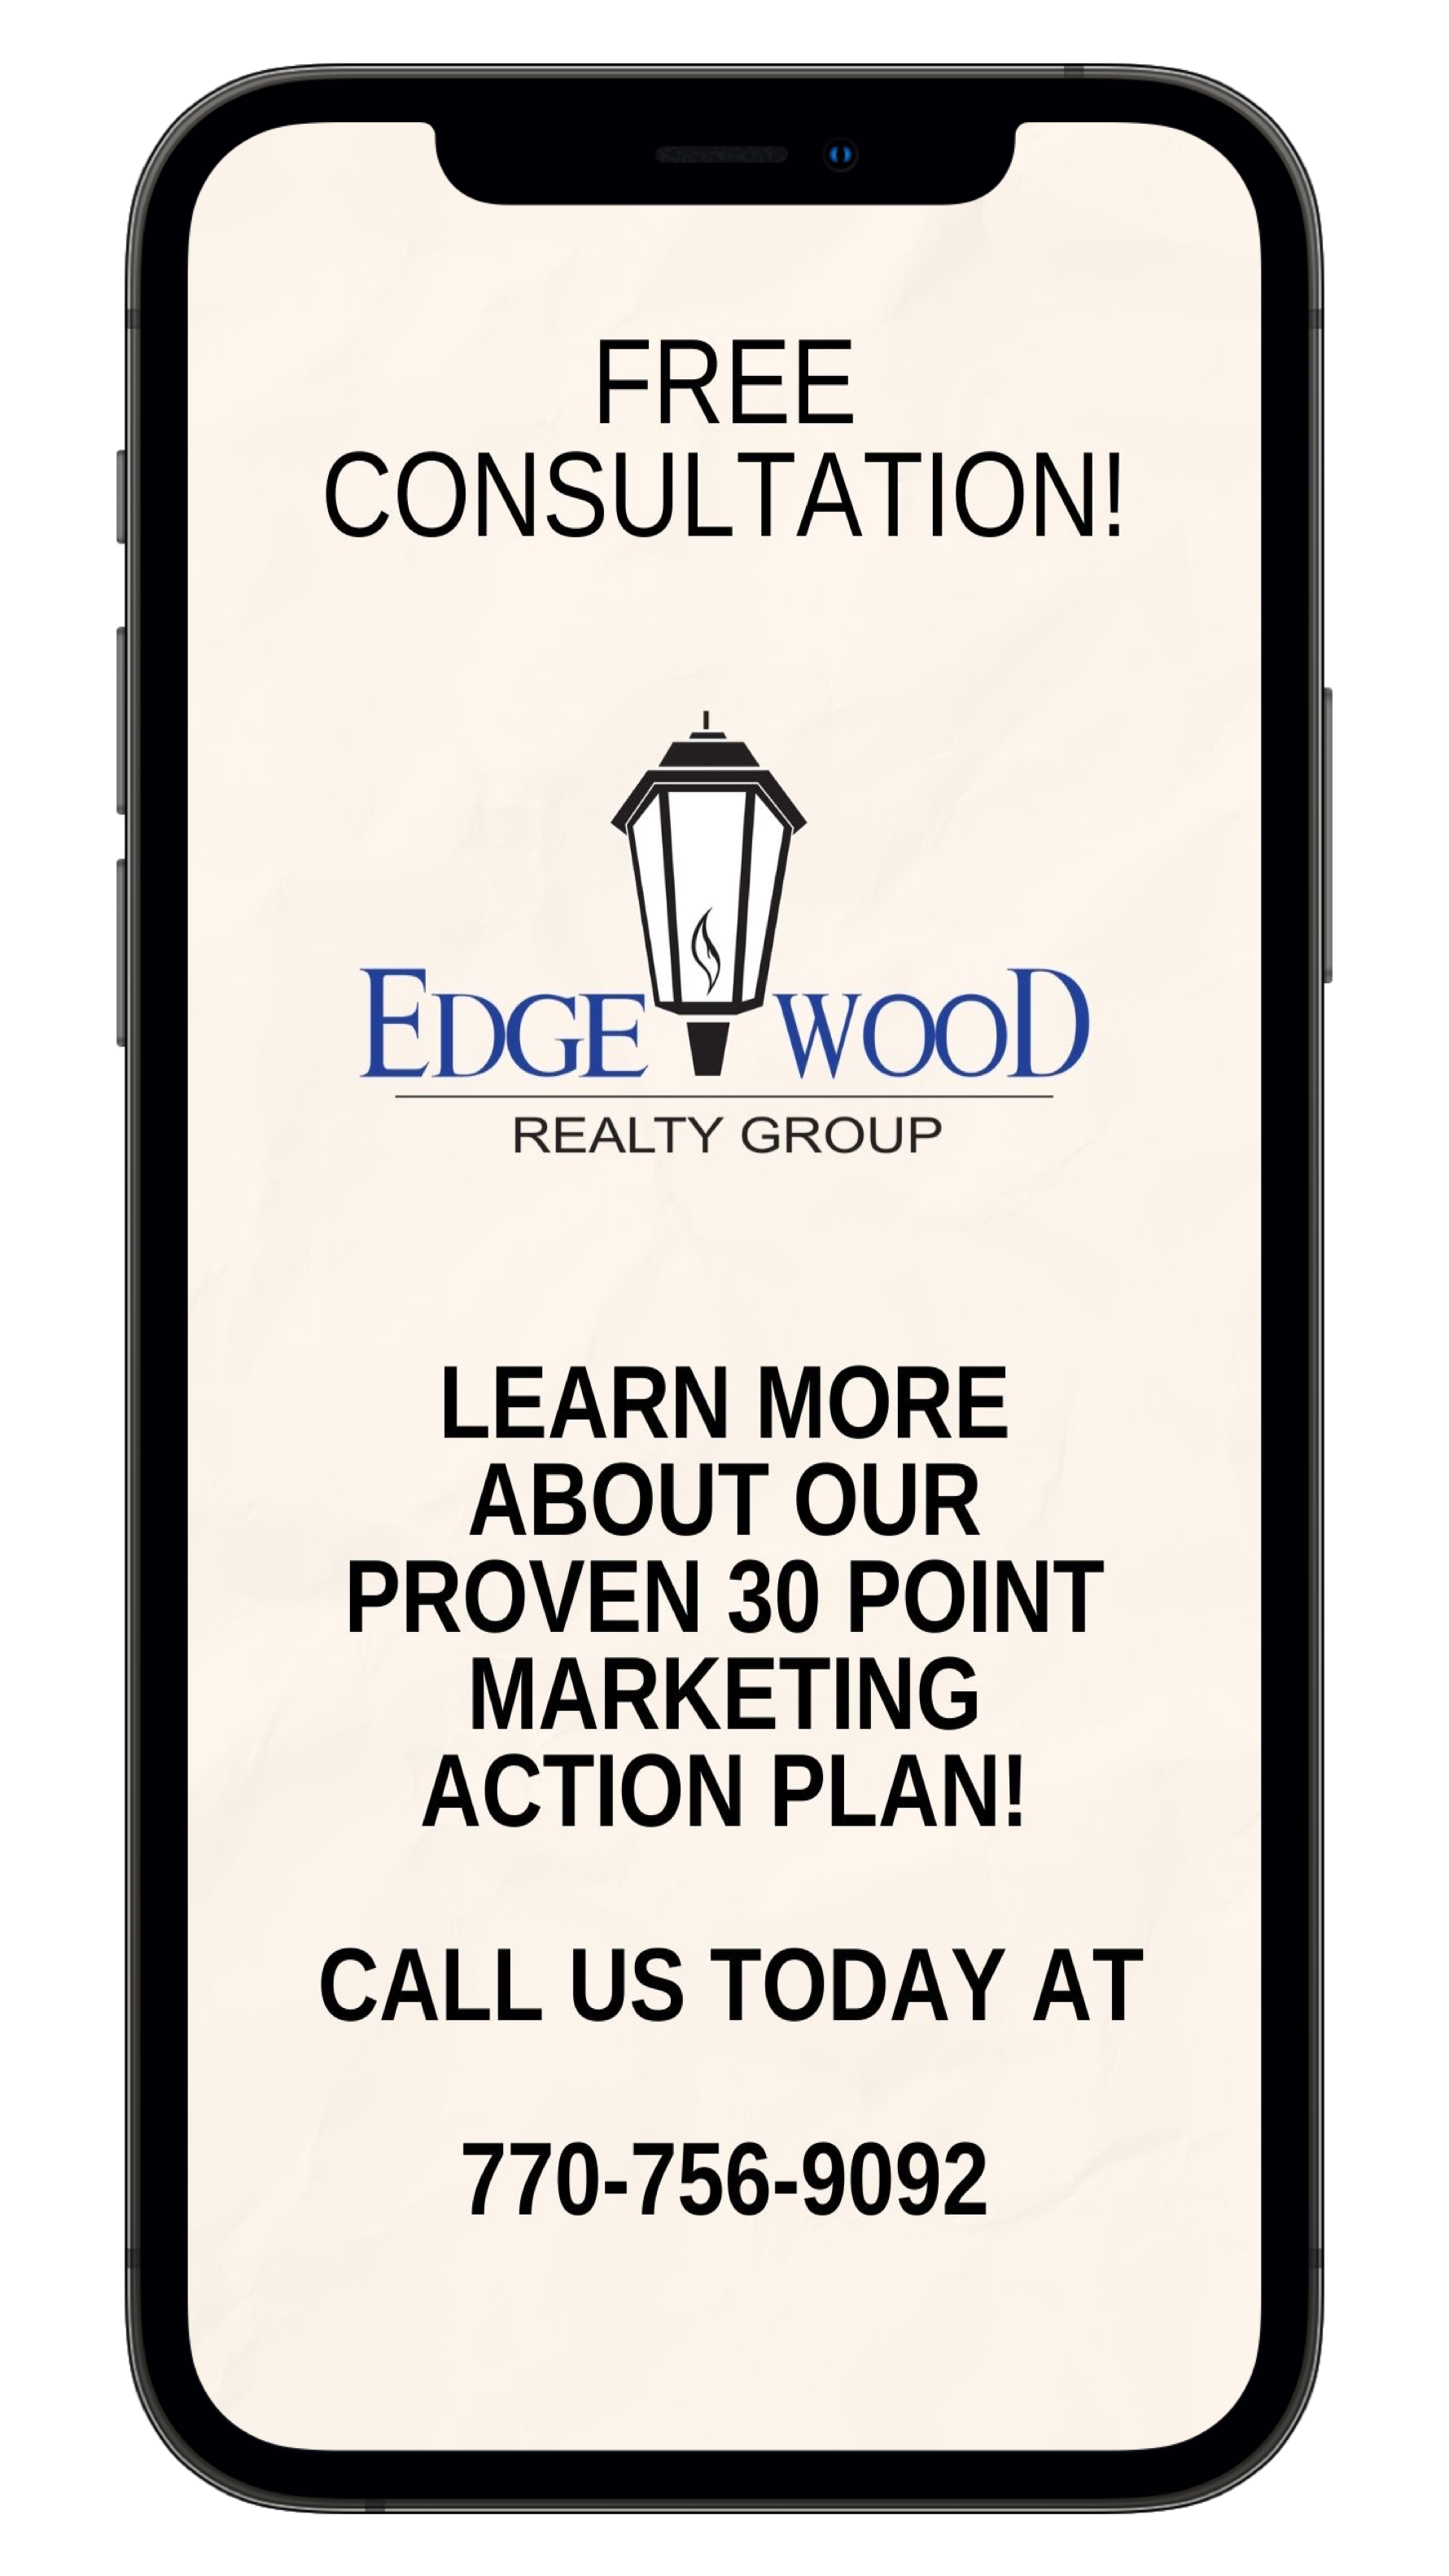 edgewood realty group free consultation